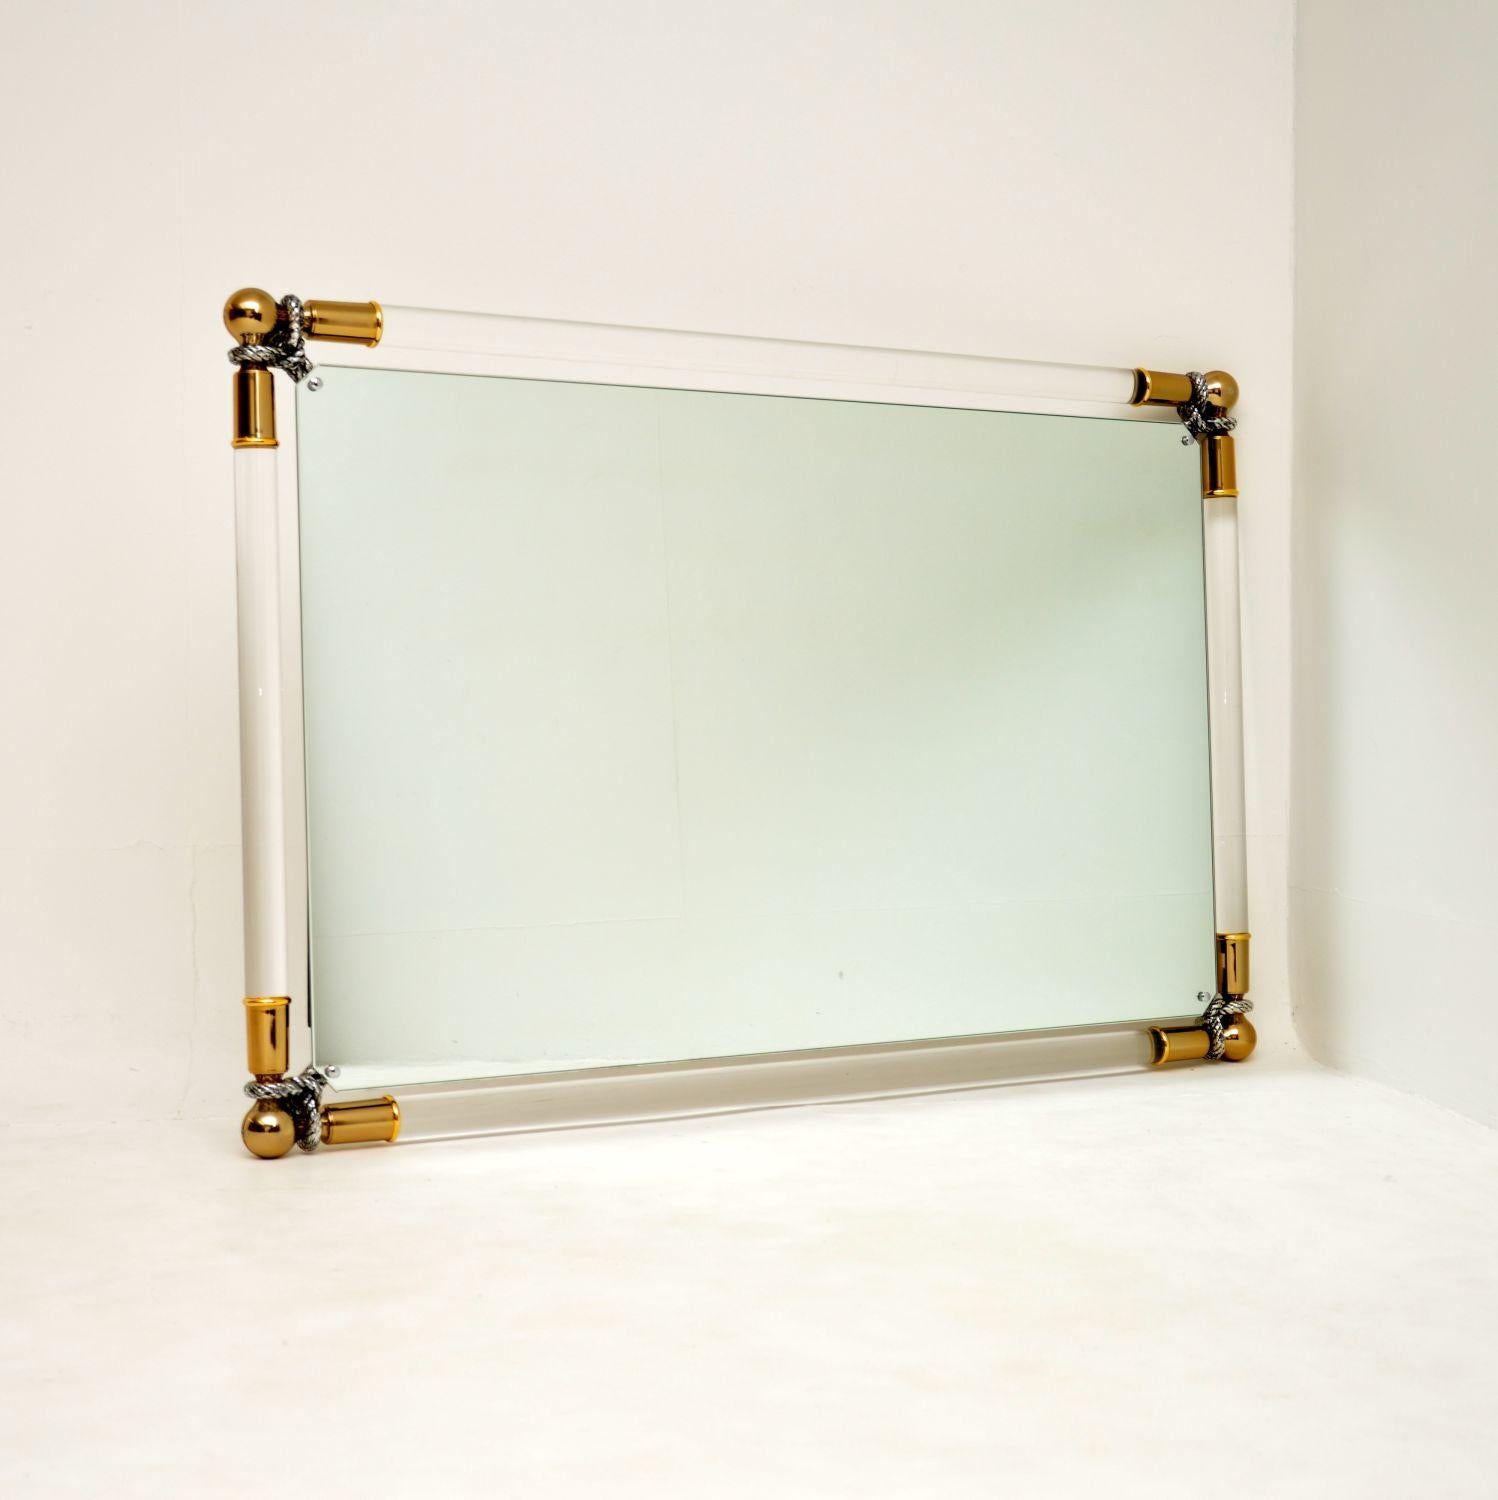 A beautiful and very impressive mirror, made in Spain by Curvasa, this dates from the 1970’s.

It is a fantastic size and is of amazing quality. The main frame is clear lucite, the corners are finished in gold and silver leaf.

This is in superb